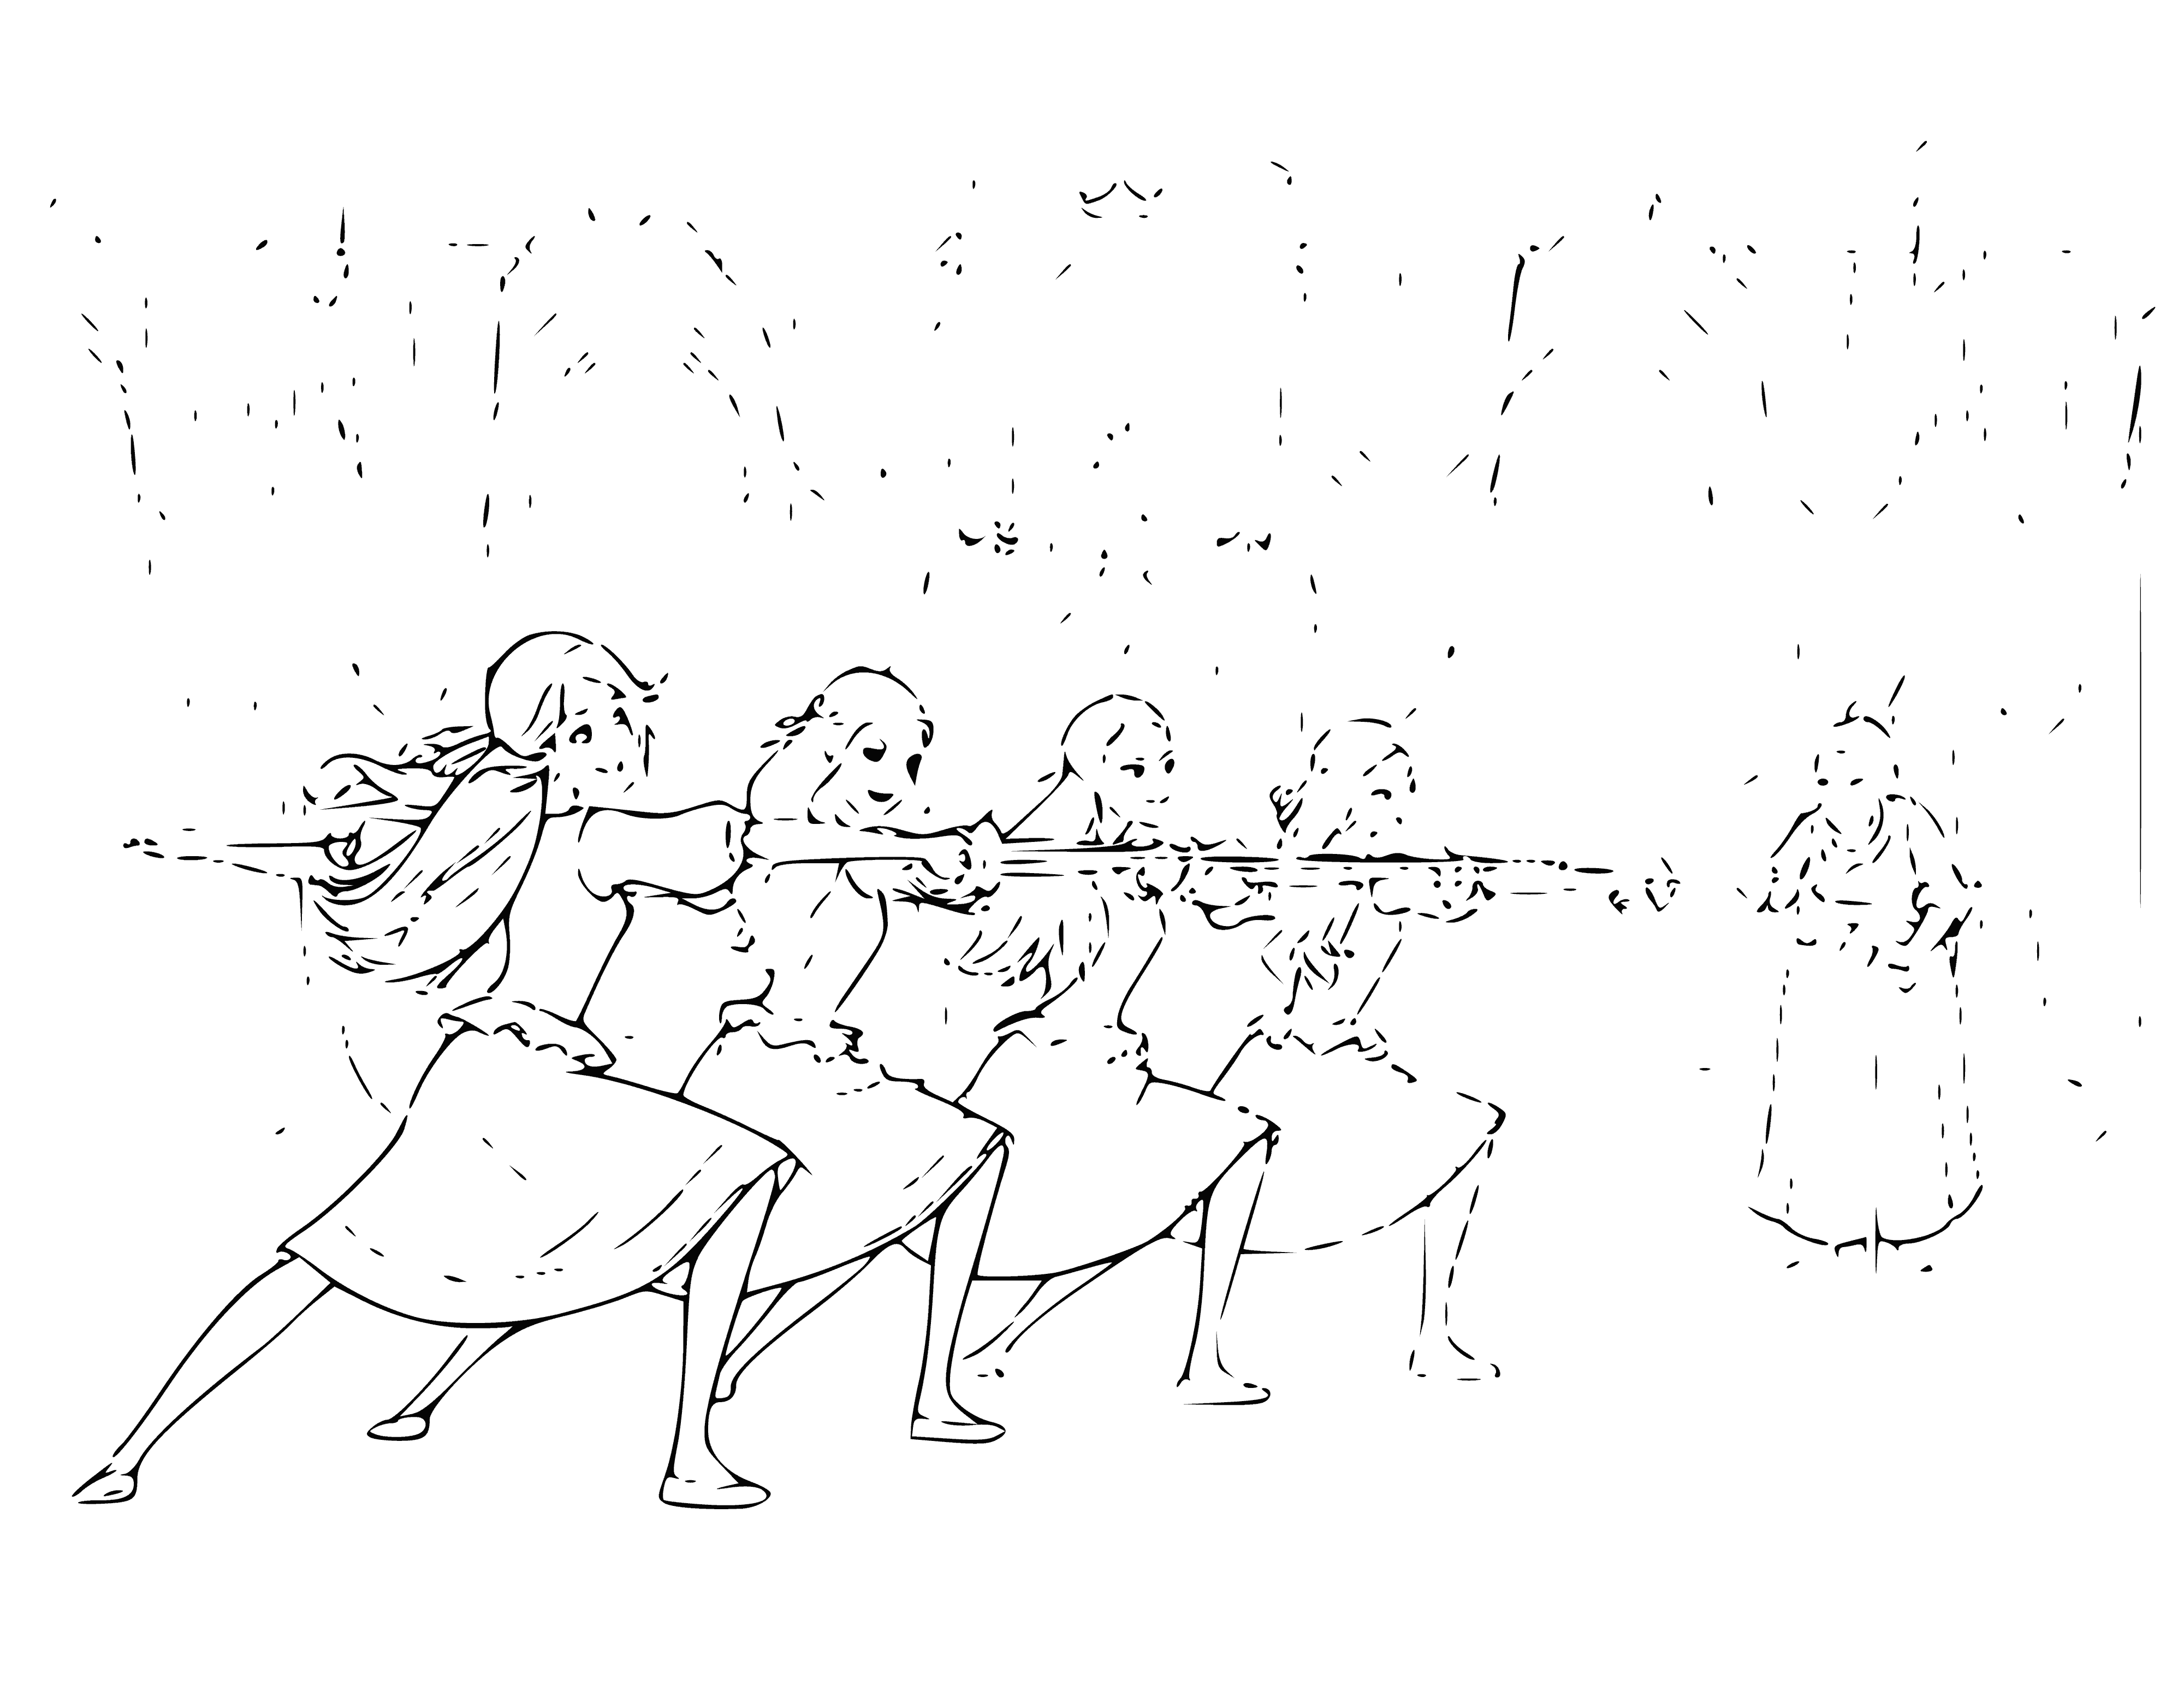 coloring page: 3 girls fencing in musketeer outfits w/ swords, flag & tall hats, standing in a grassy field w/ trees in bg.